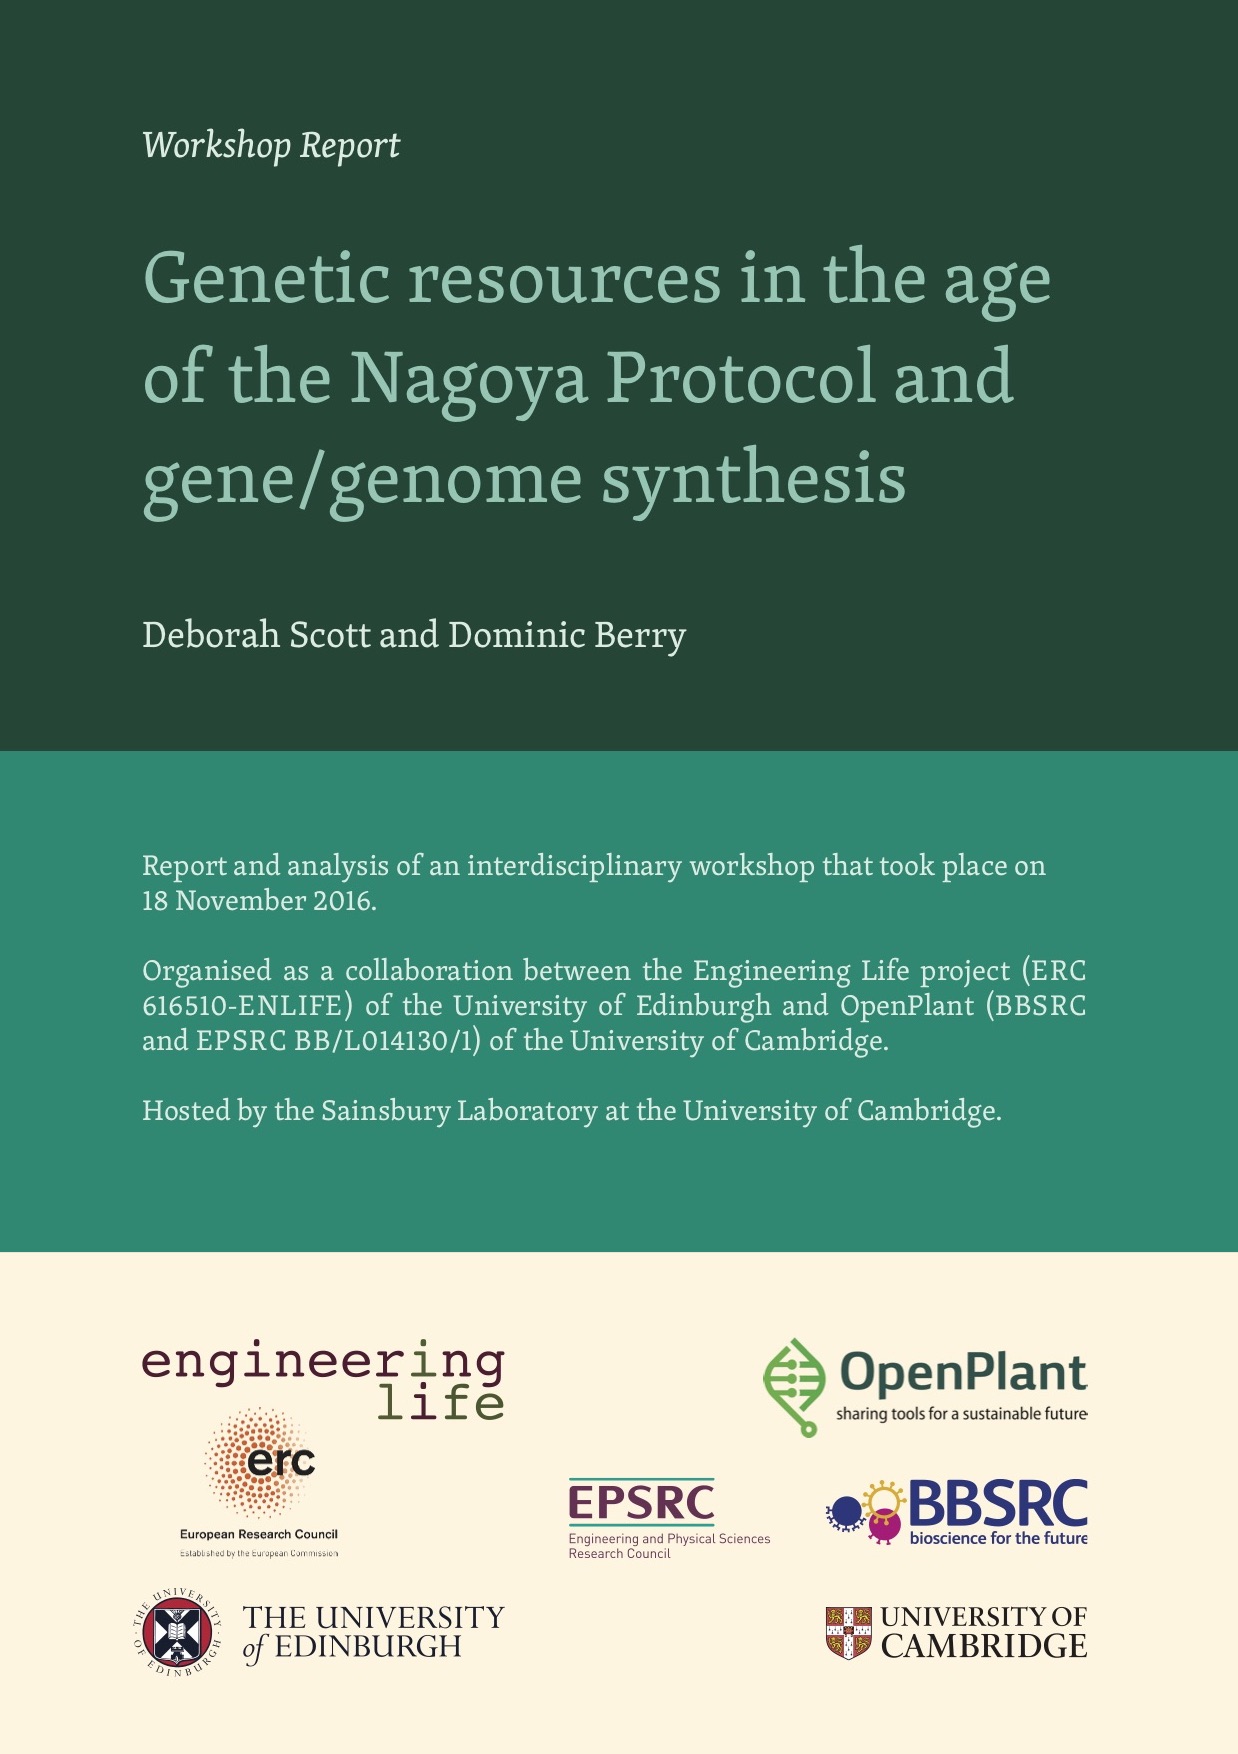 Genetic Resources in the Age of the Nagoya Protocol and Gene/Genome Synthesis